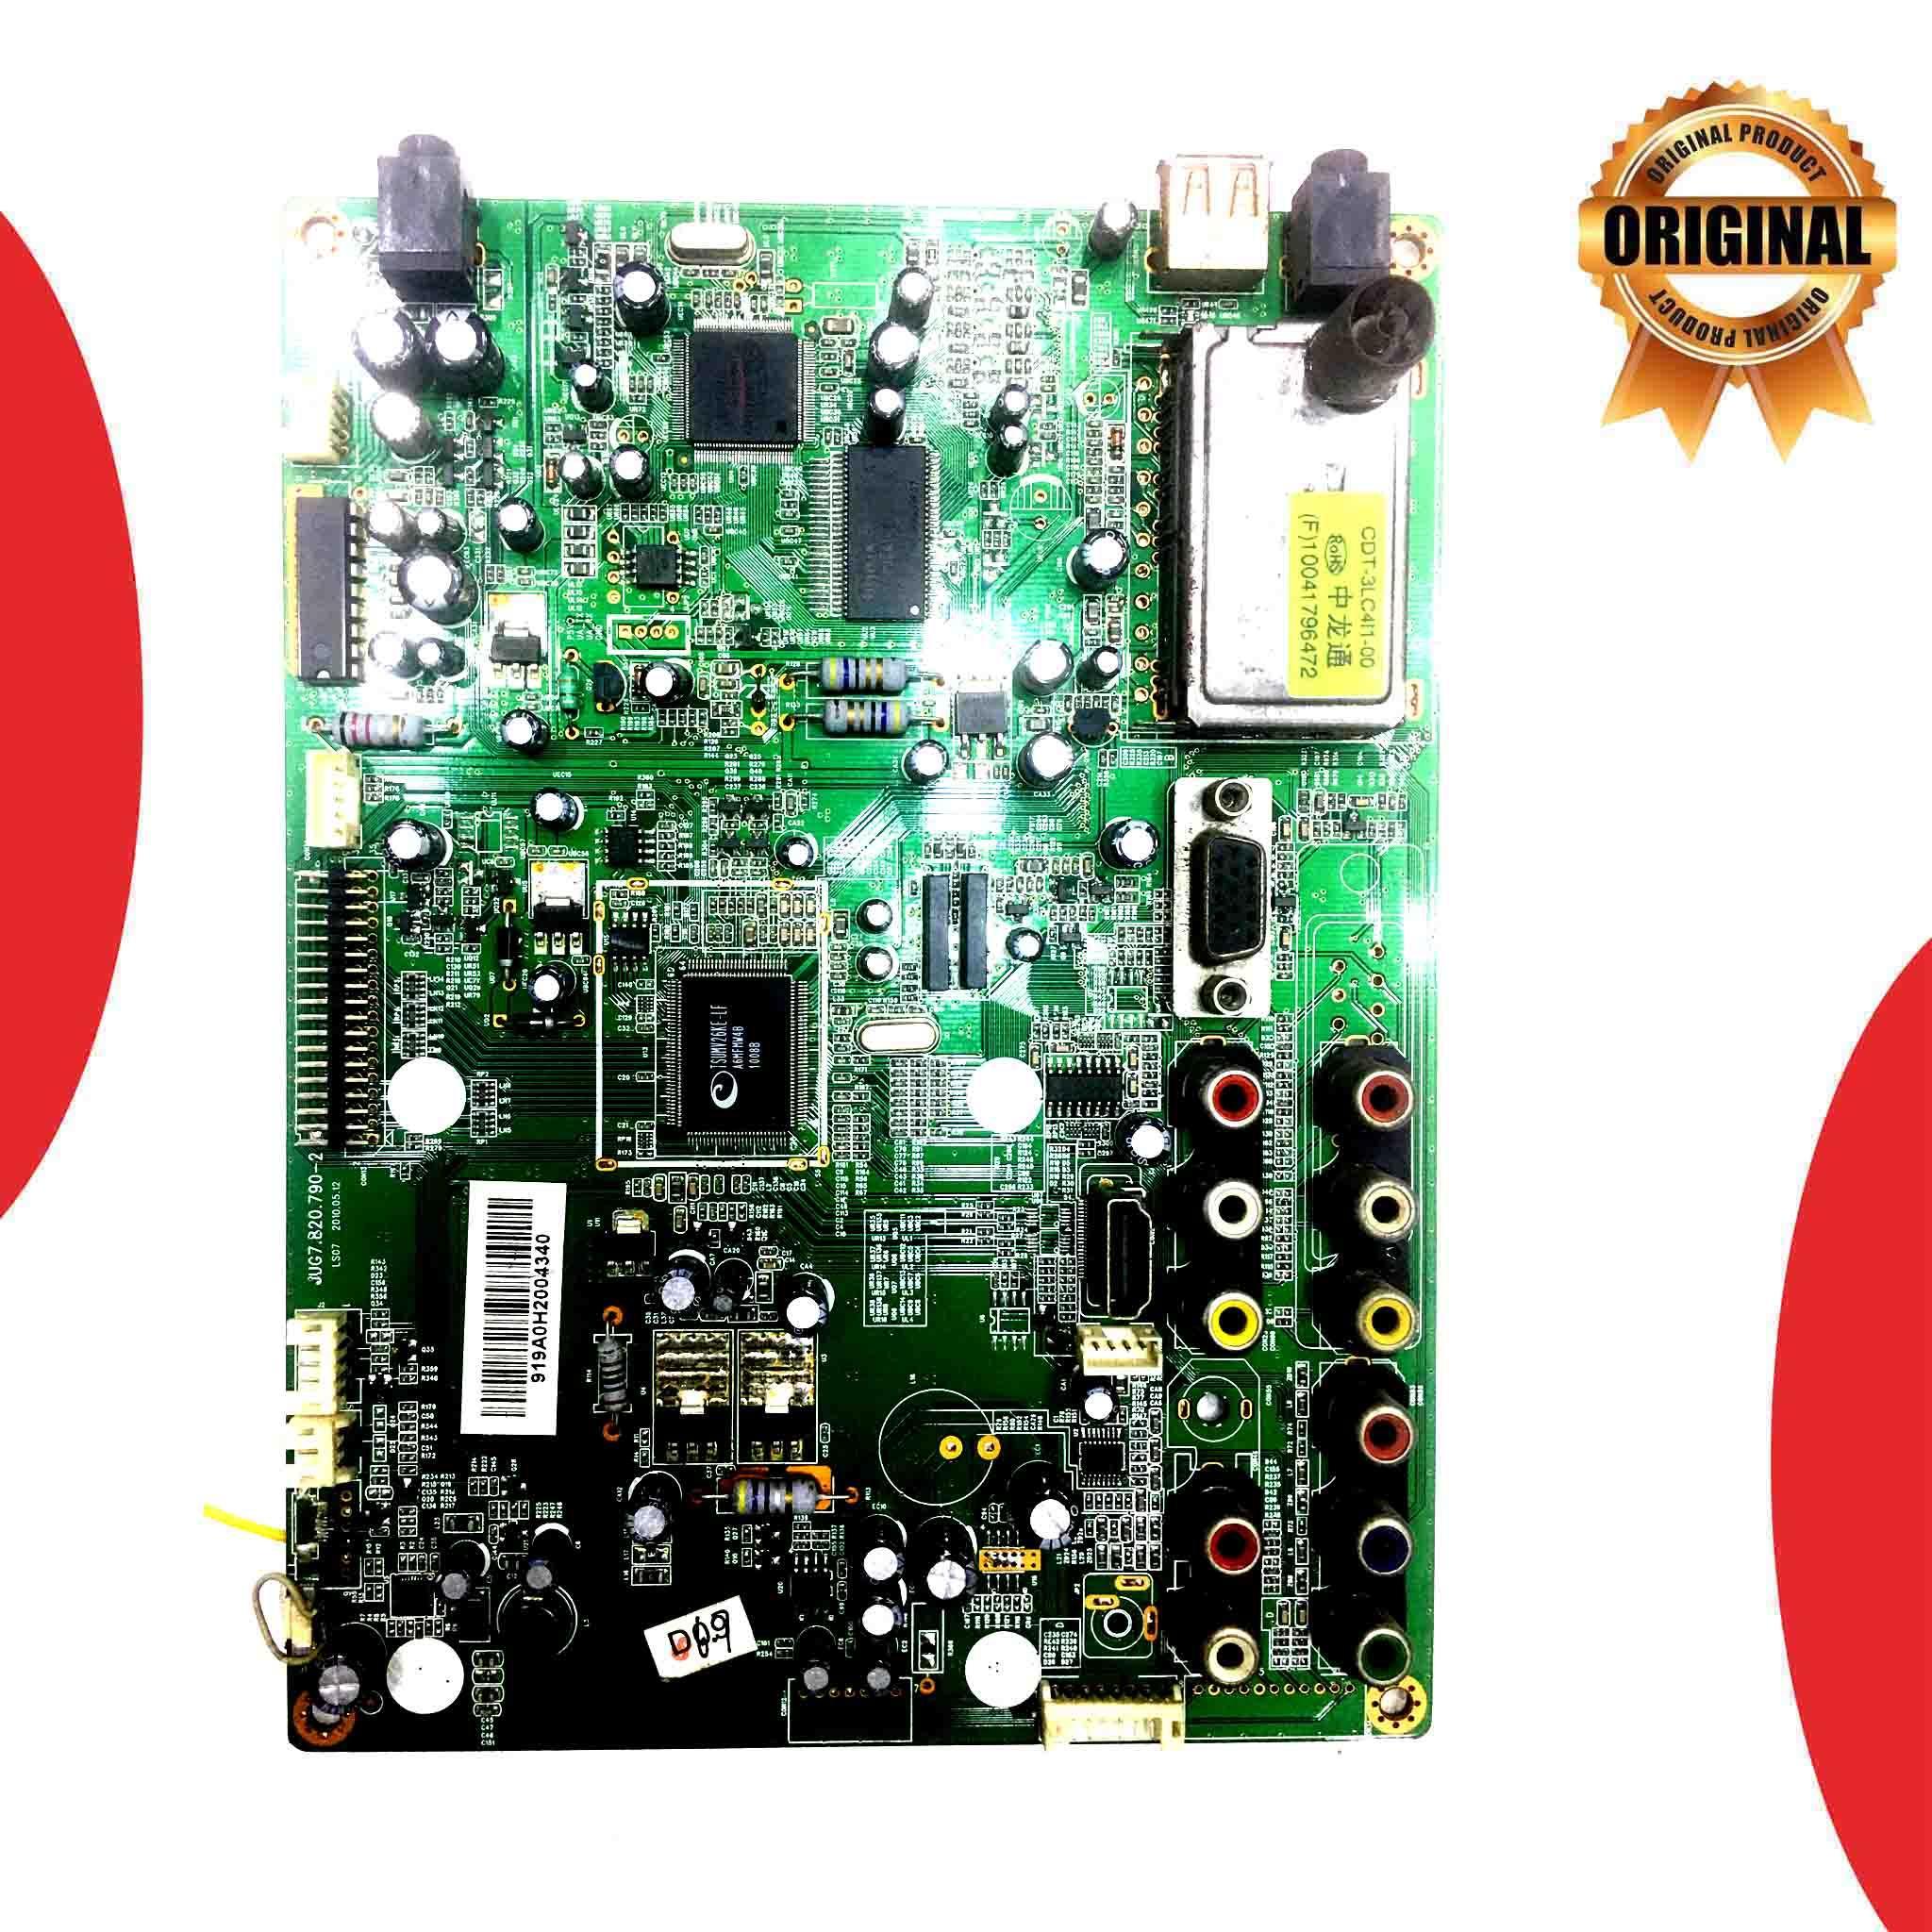 Aftron 20 inch LCD TV Motherboard for Model AFLED2010 - Great Bharat Electronics